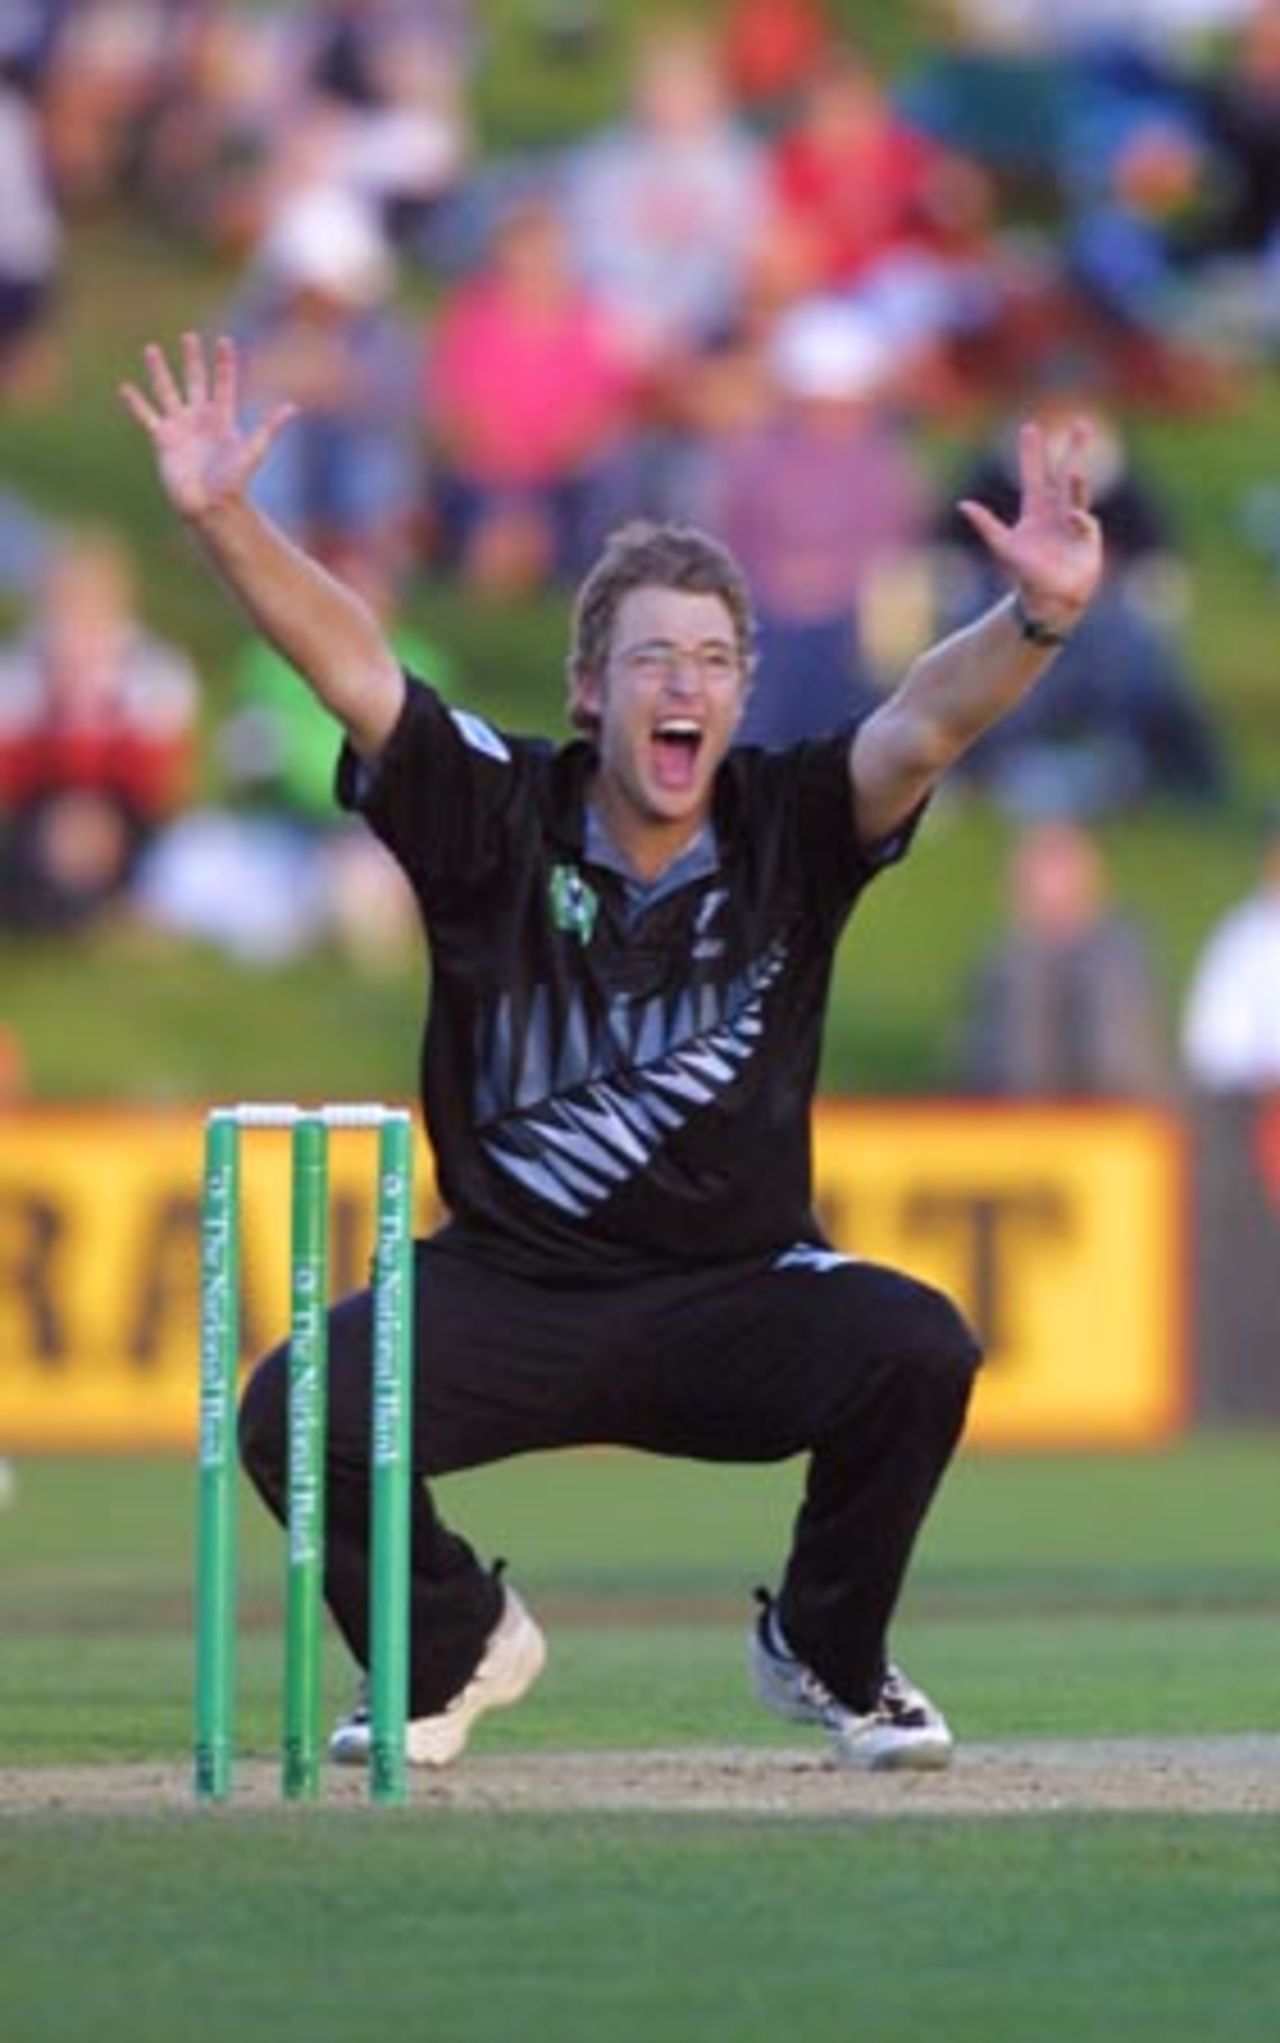 New Zealand left arm orthodox spinner Daniel Vettori appeals unsuccessfully to umpire Steve Dunne for a leg before wicket decision. 4th One-Day International: New Zealand v Sri Lanka at WestpacTrust Park, Hamilton, 8 February 2001.